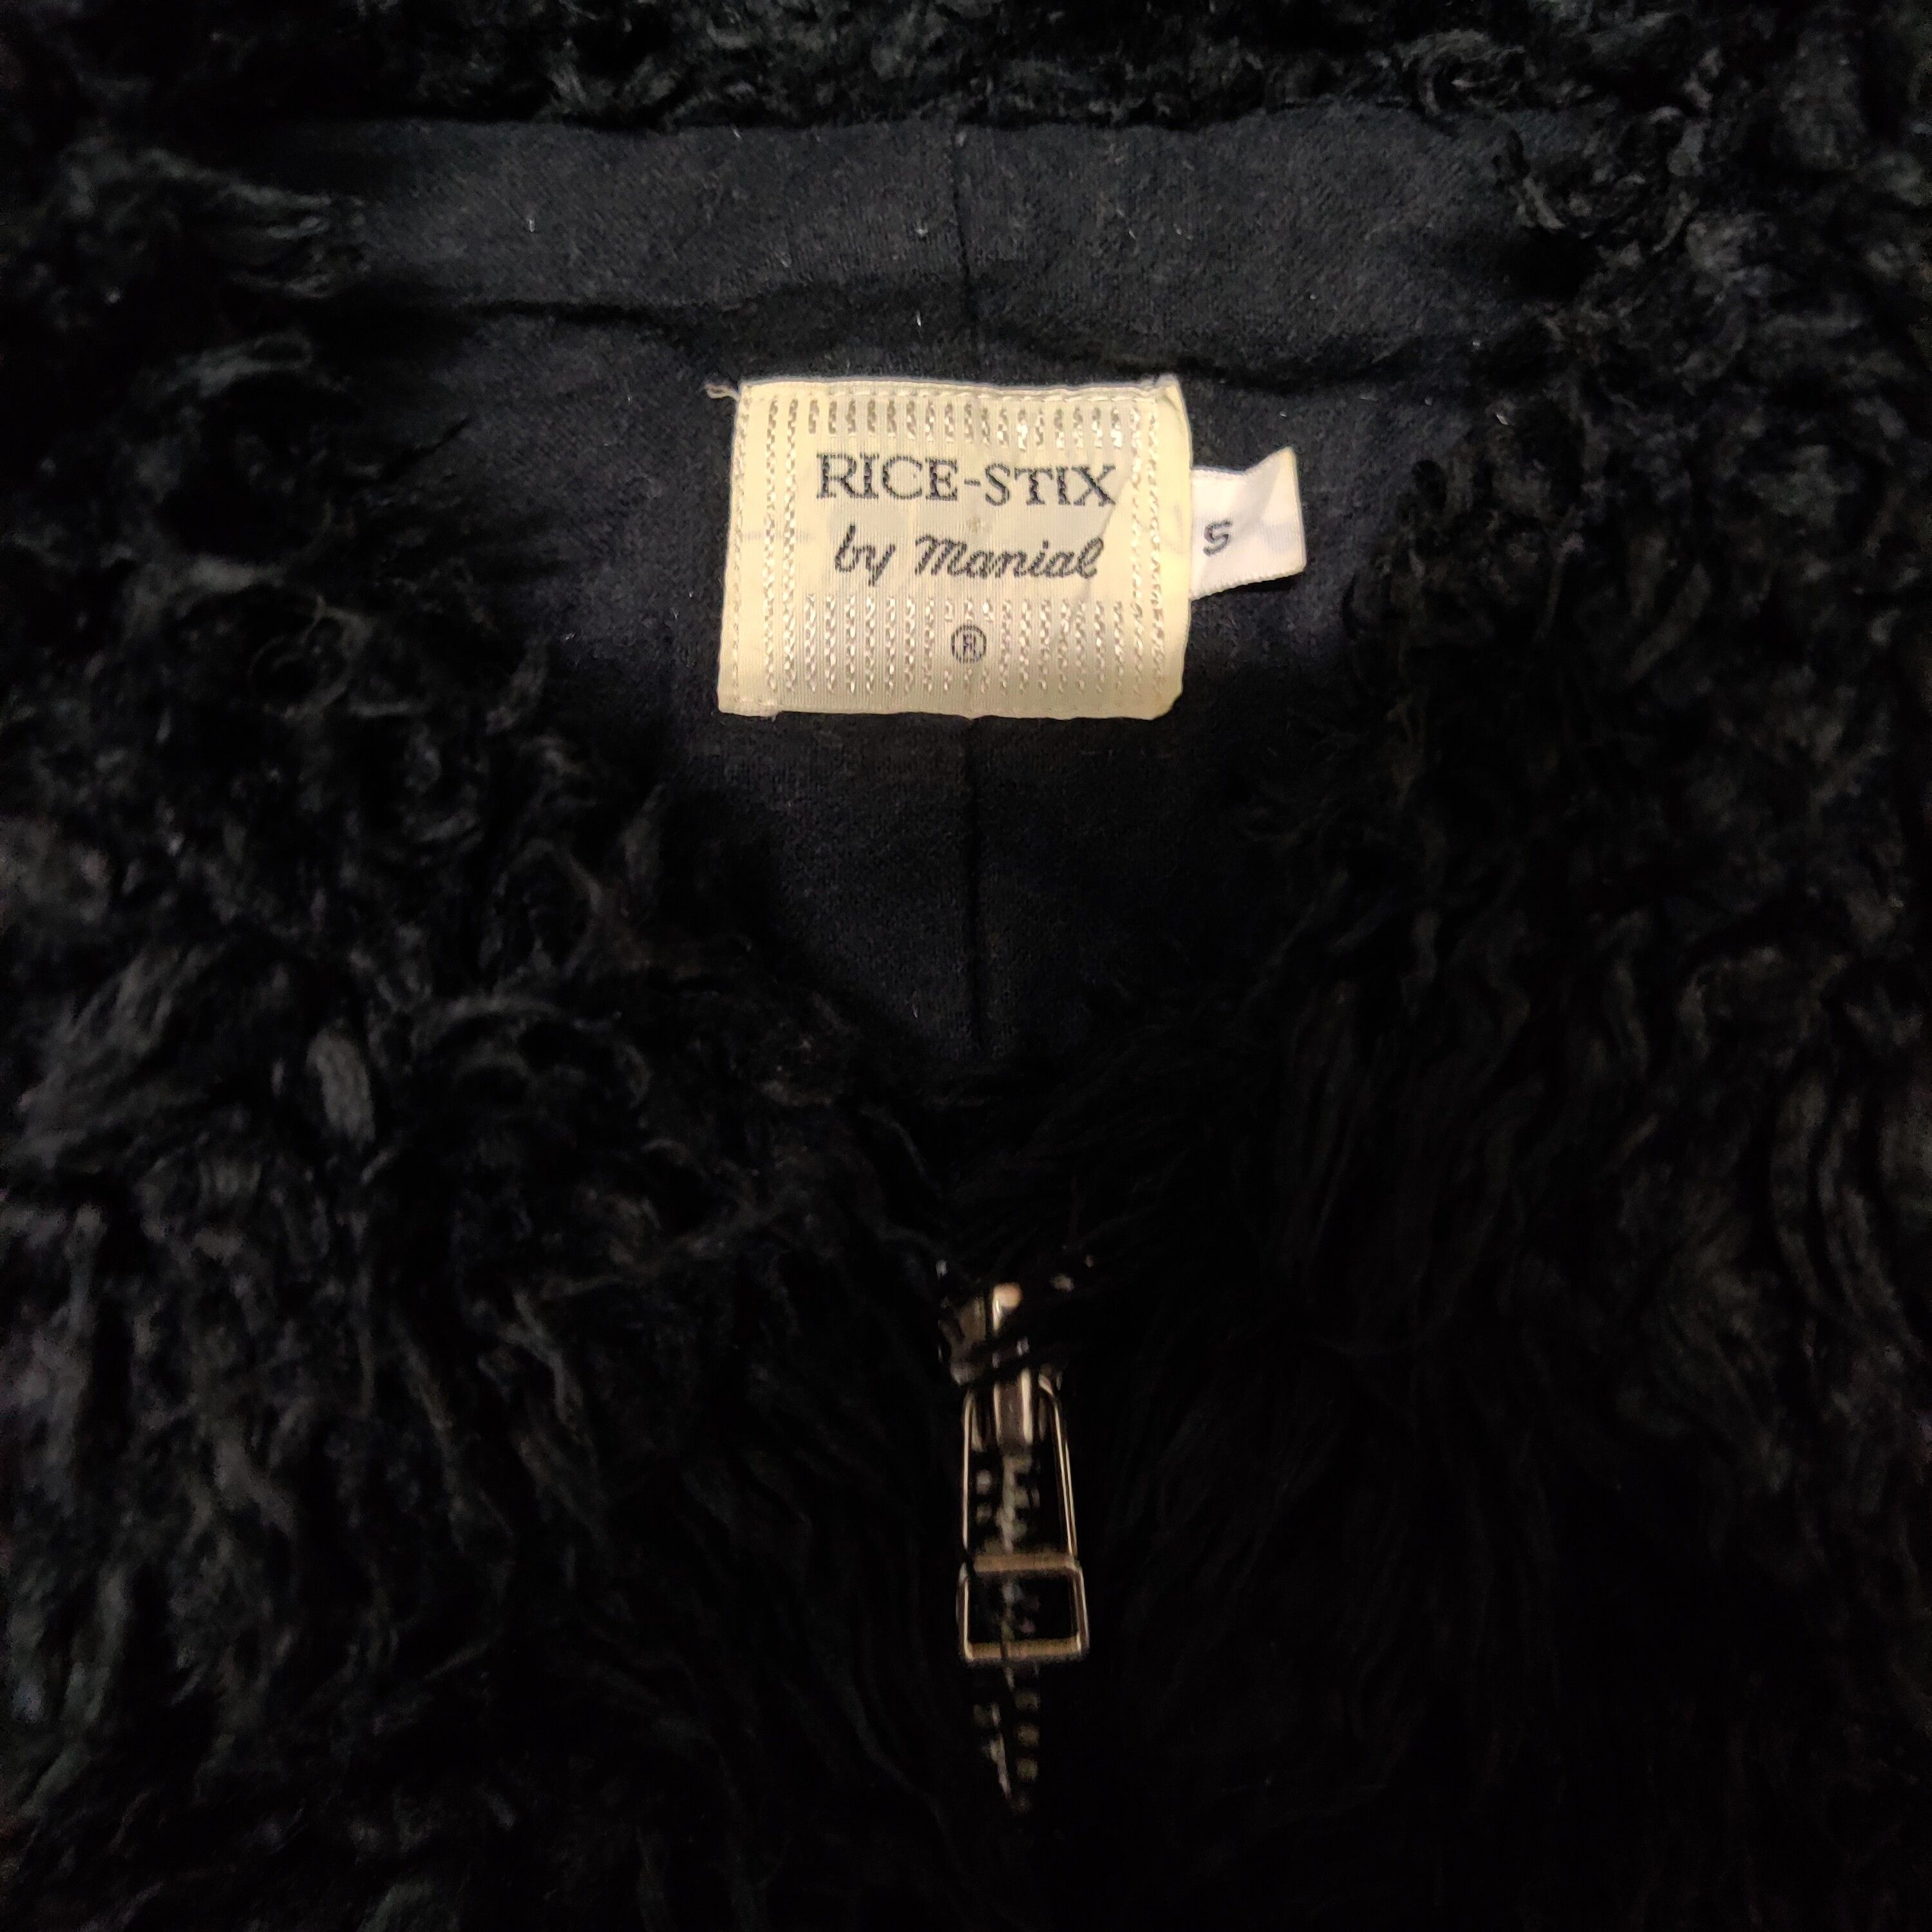 Archival Clothing - Vintage Japanese Brand Rice-Stix by Manial Fur Zip Up - 6